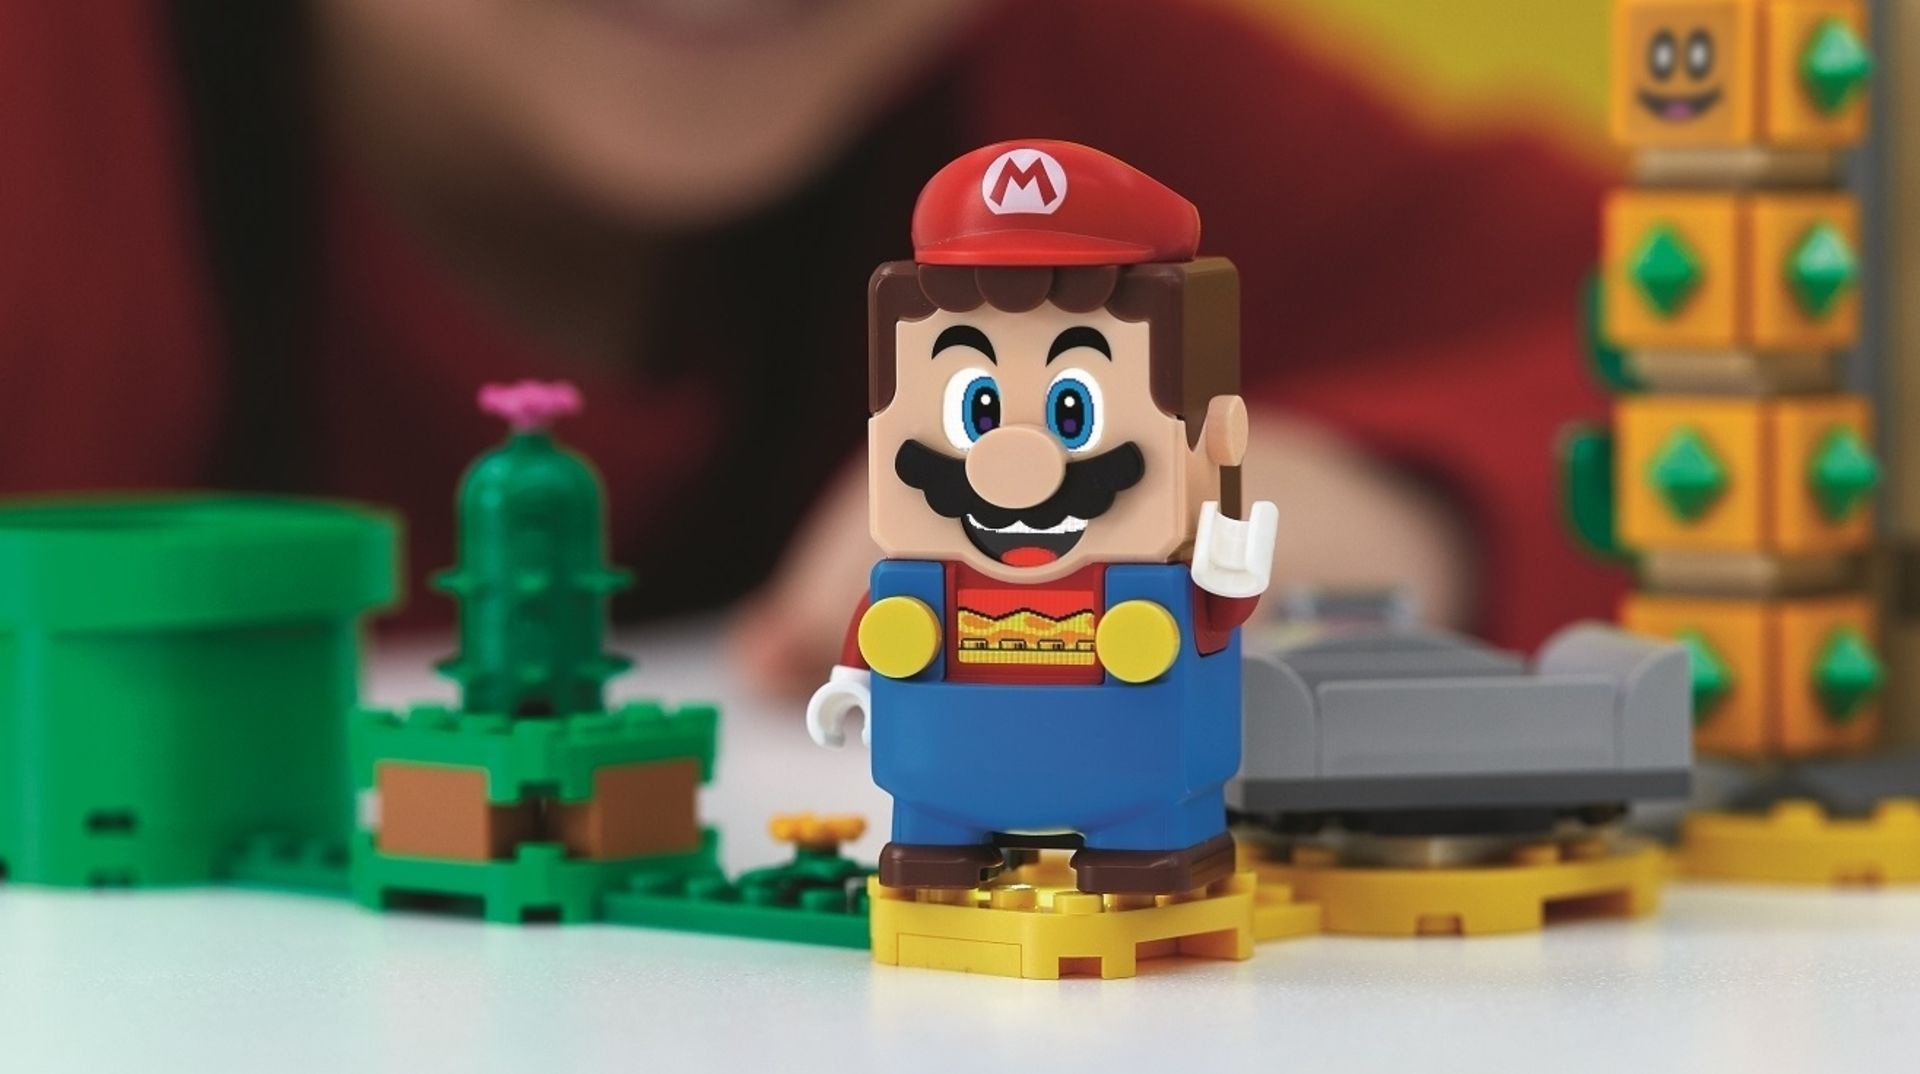 Random Turns Out You Can Play Lego Mario Without Buying The Lego Nintendo Life